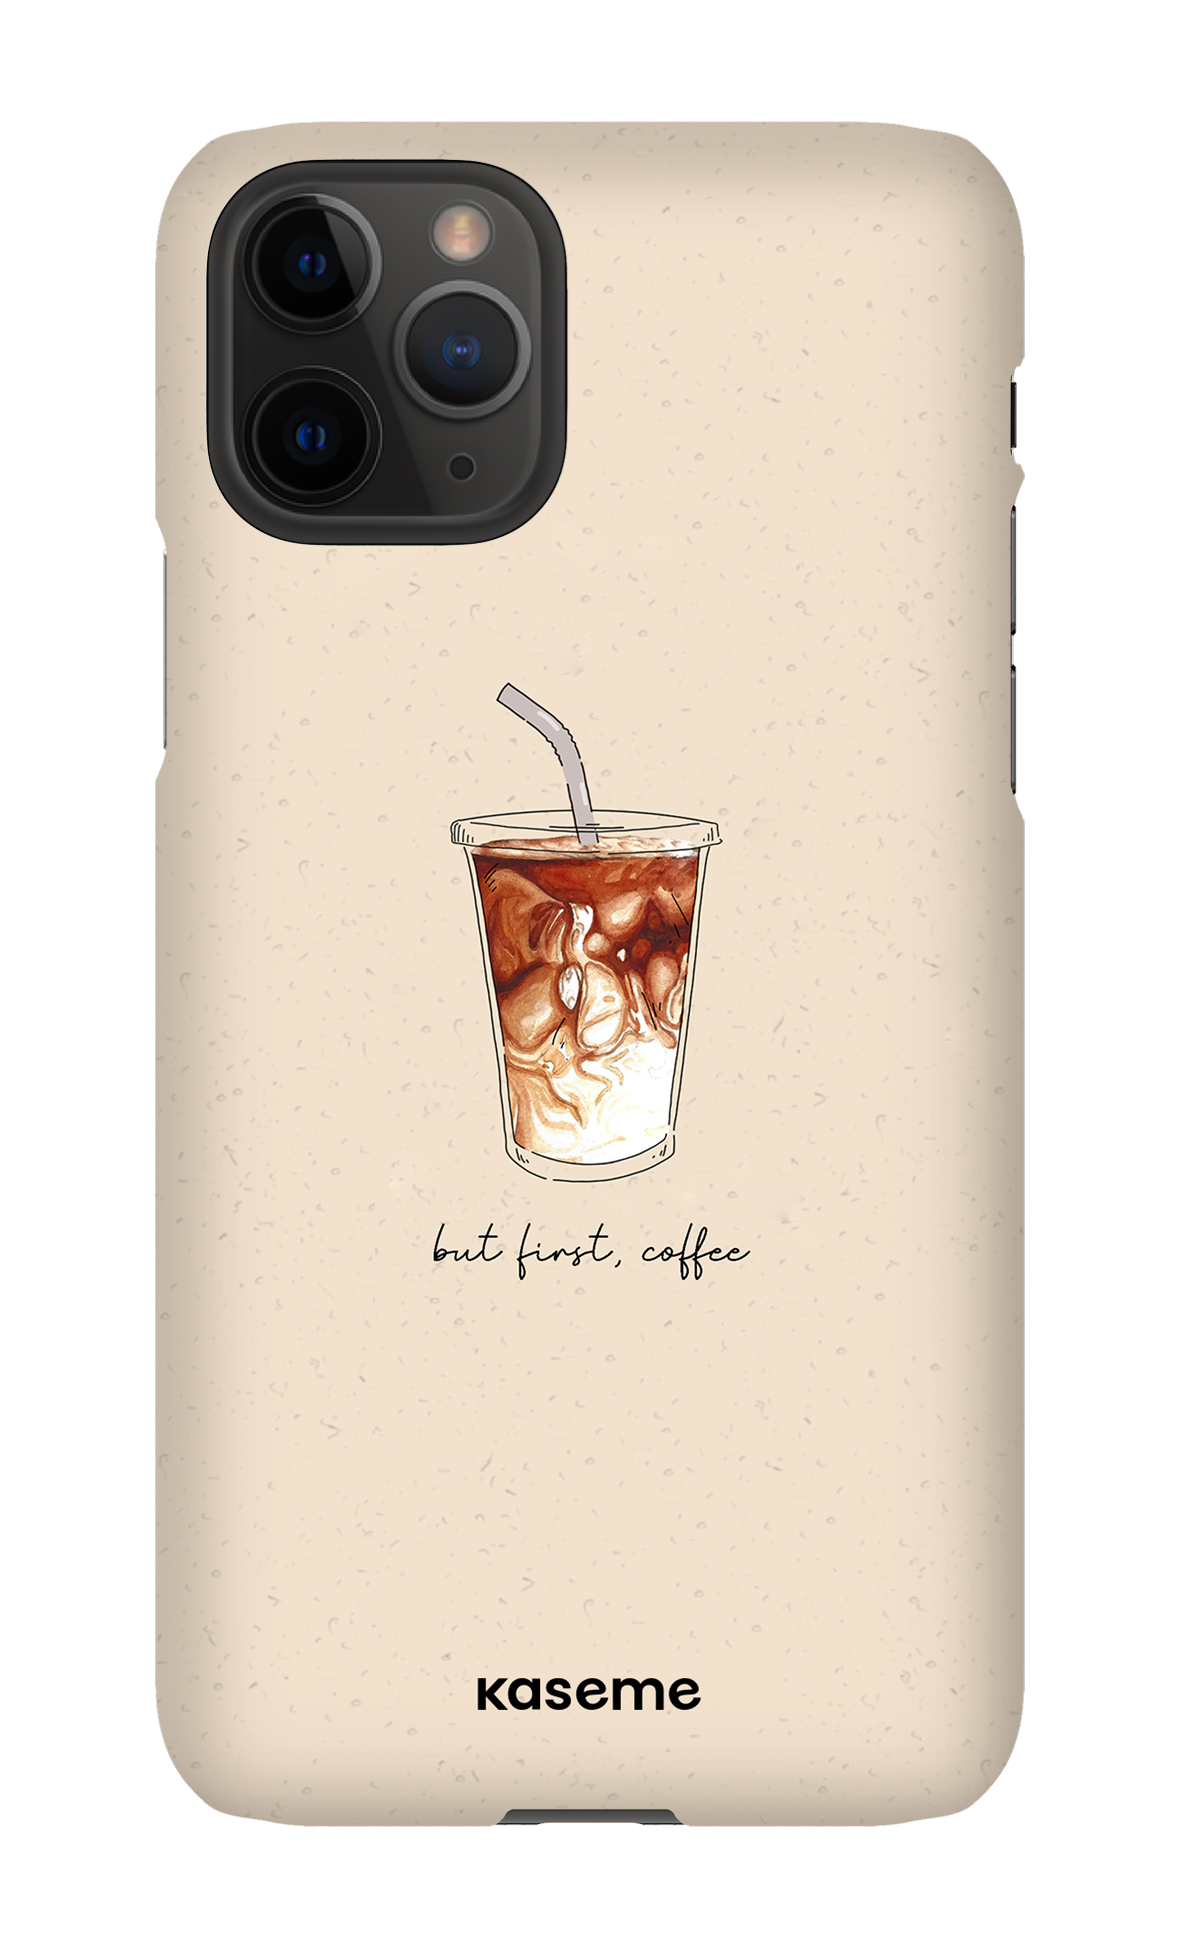 But first, coffee - iPhone 11 Pro